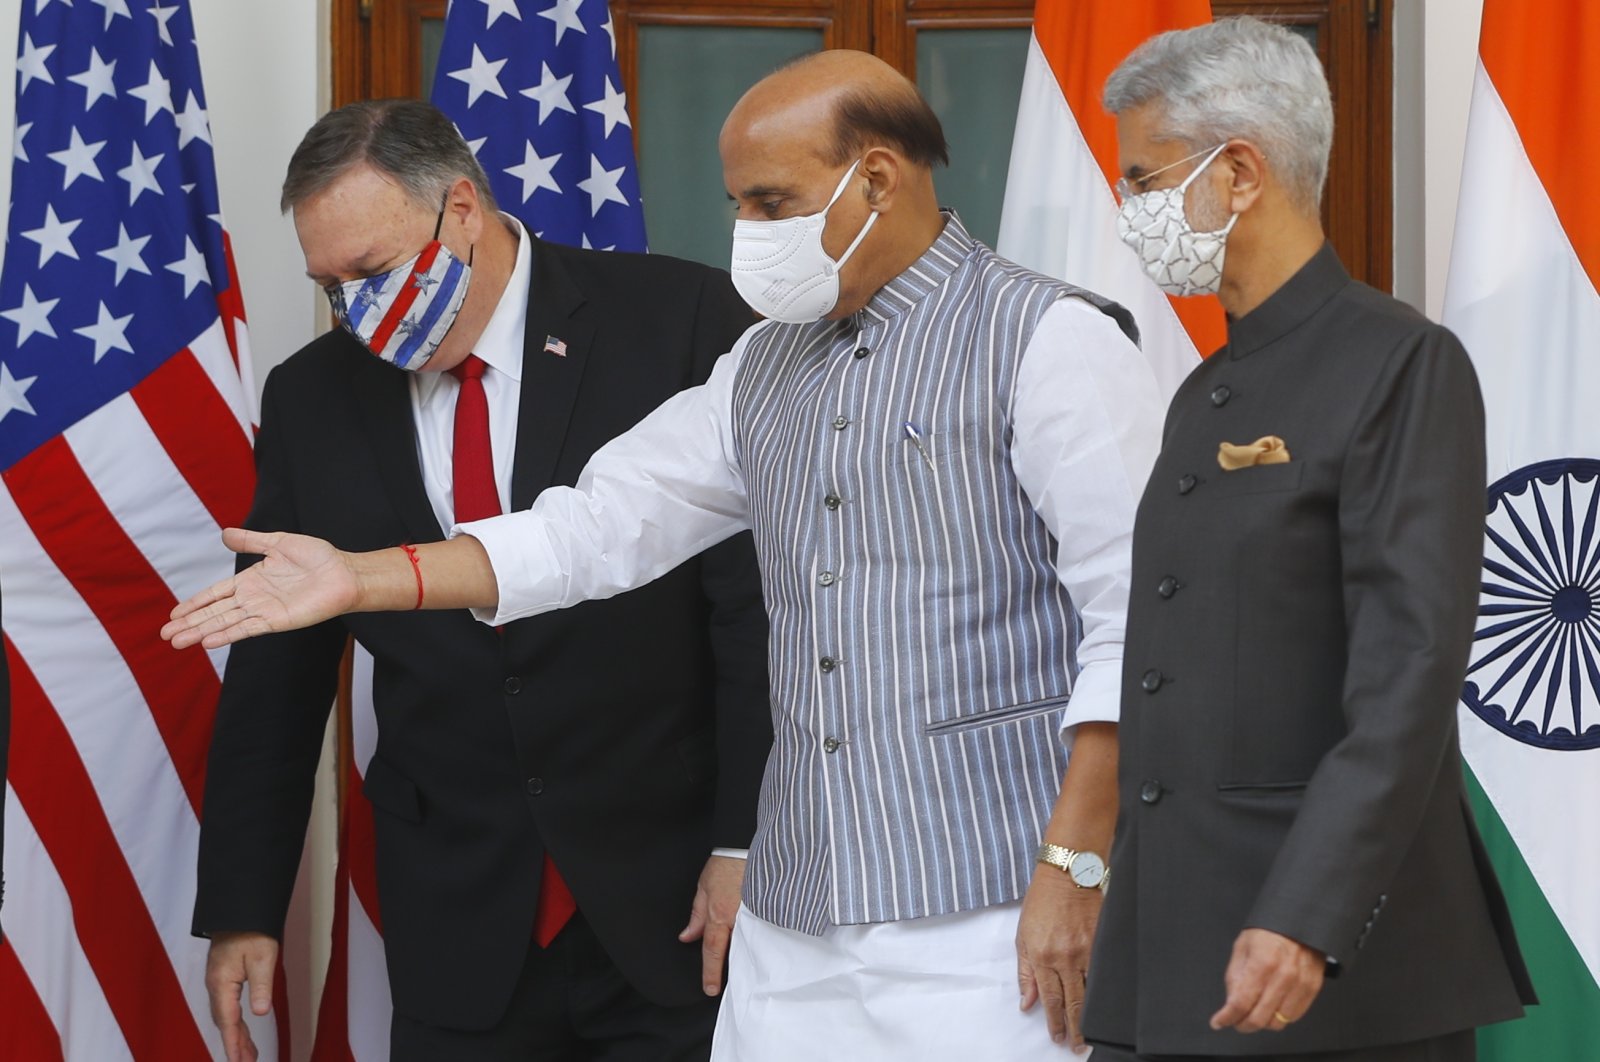 Indian Defence Minister Rajnath Singh (C), gestures towards U.S. Secretary of State Mike Pompeo (L), with Indian Foreign Minister Subrahmanyam Jaishankar, standing beside him, ahead of their meeting at Hyderabad House in New Delhi, India, Tuesday, Oct. 27, 2020. (AP Photo)